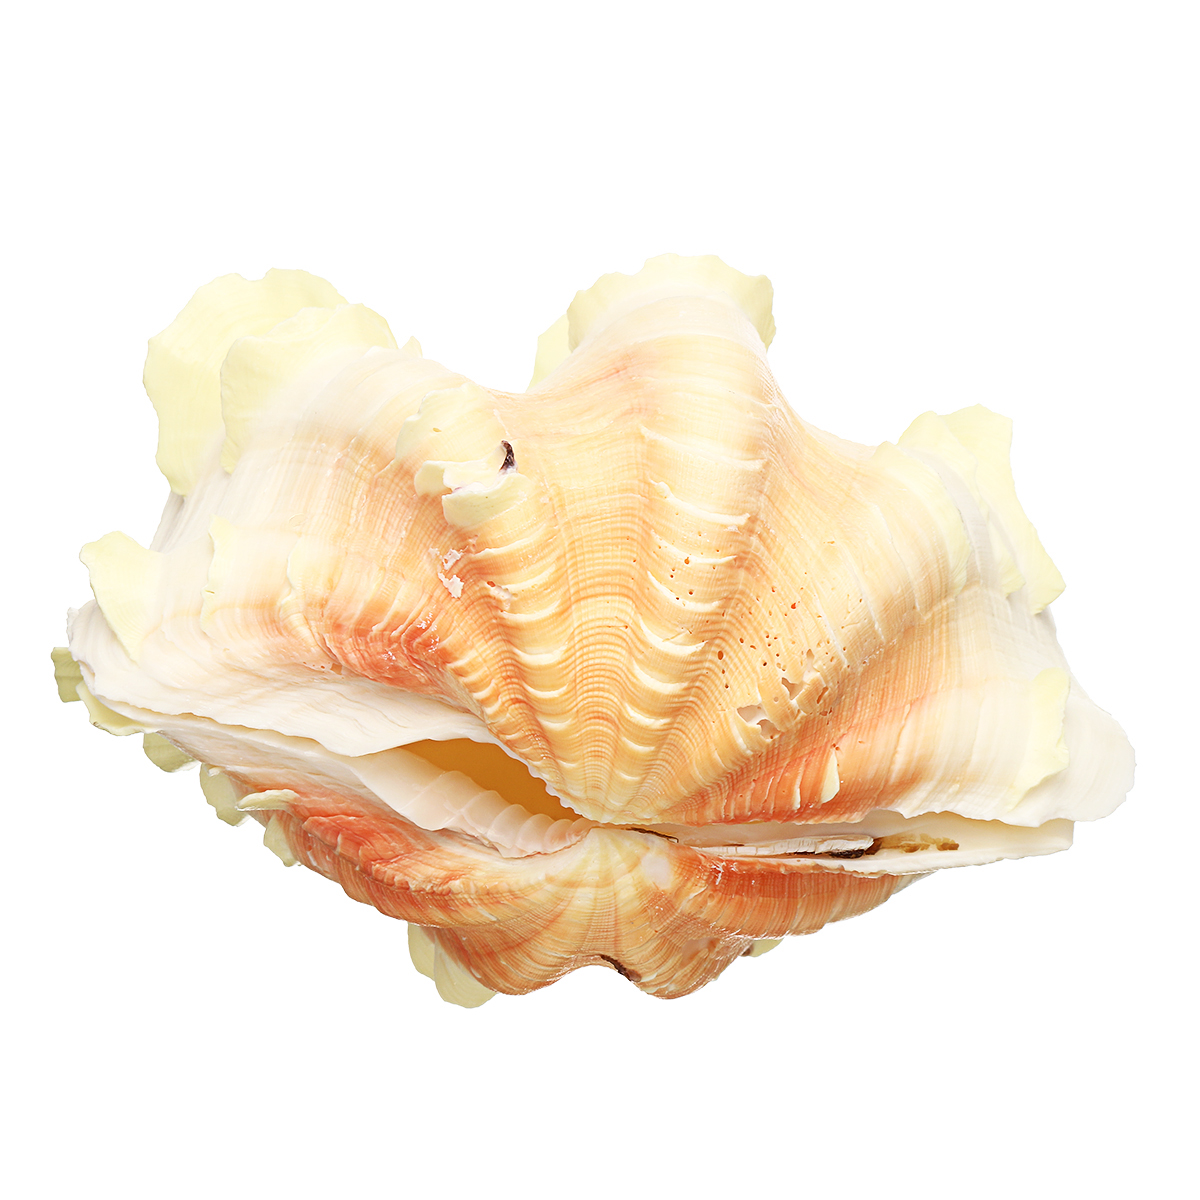 

16-18cm Natural Marine Shell Tridacna Clam Conch Home Furnishing Giant Large Sea Decorations